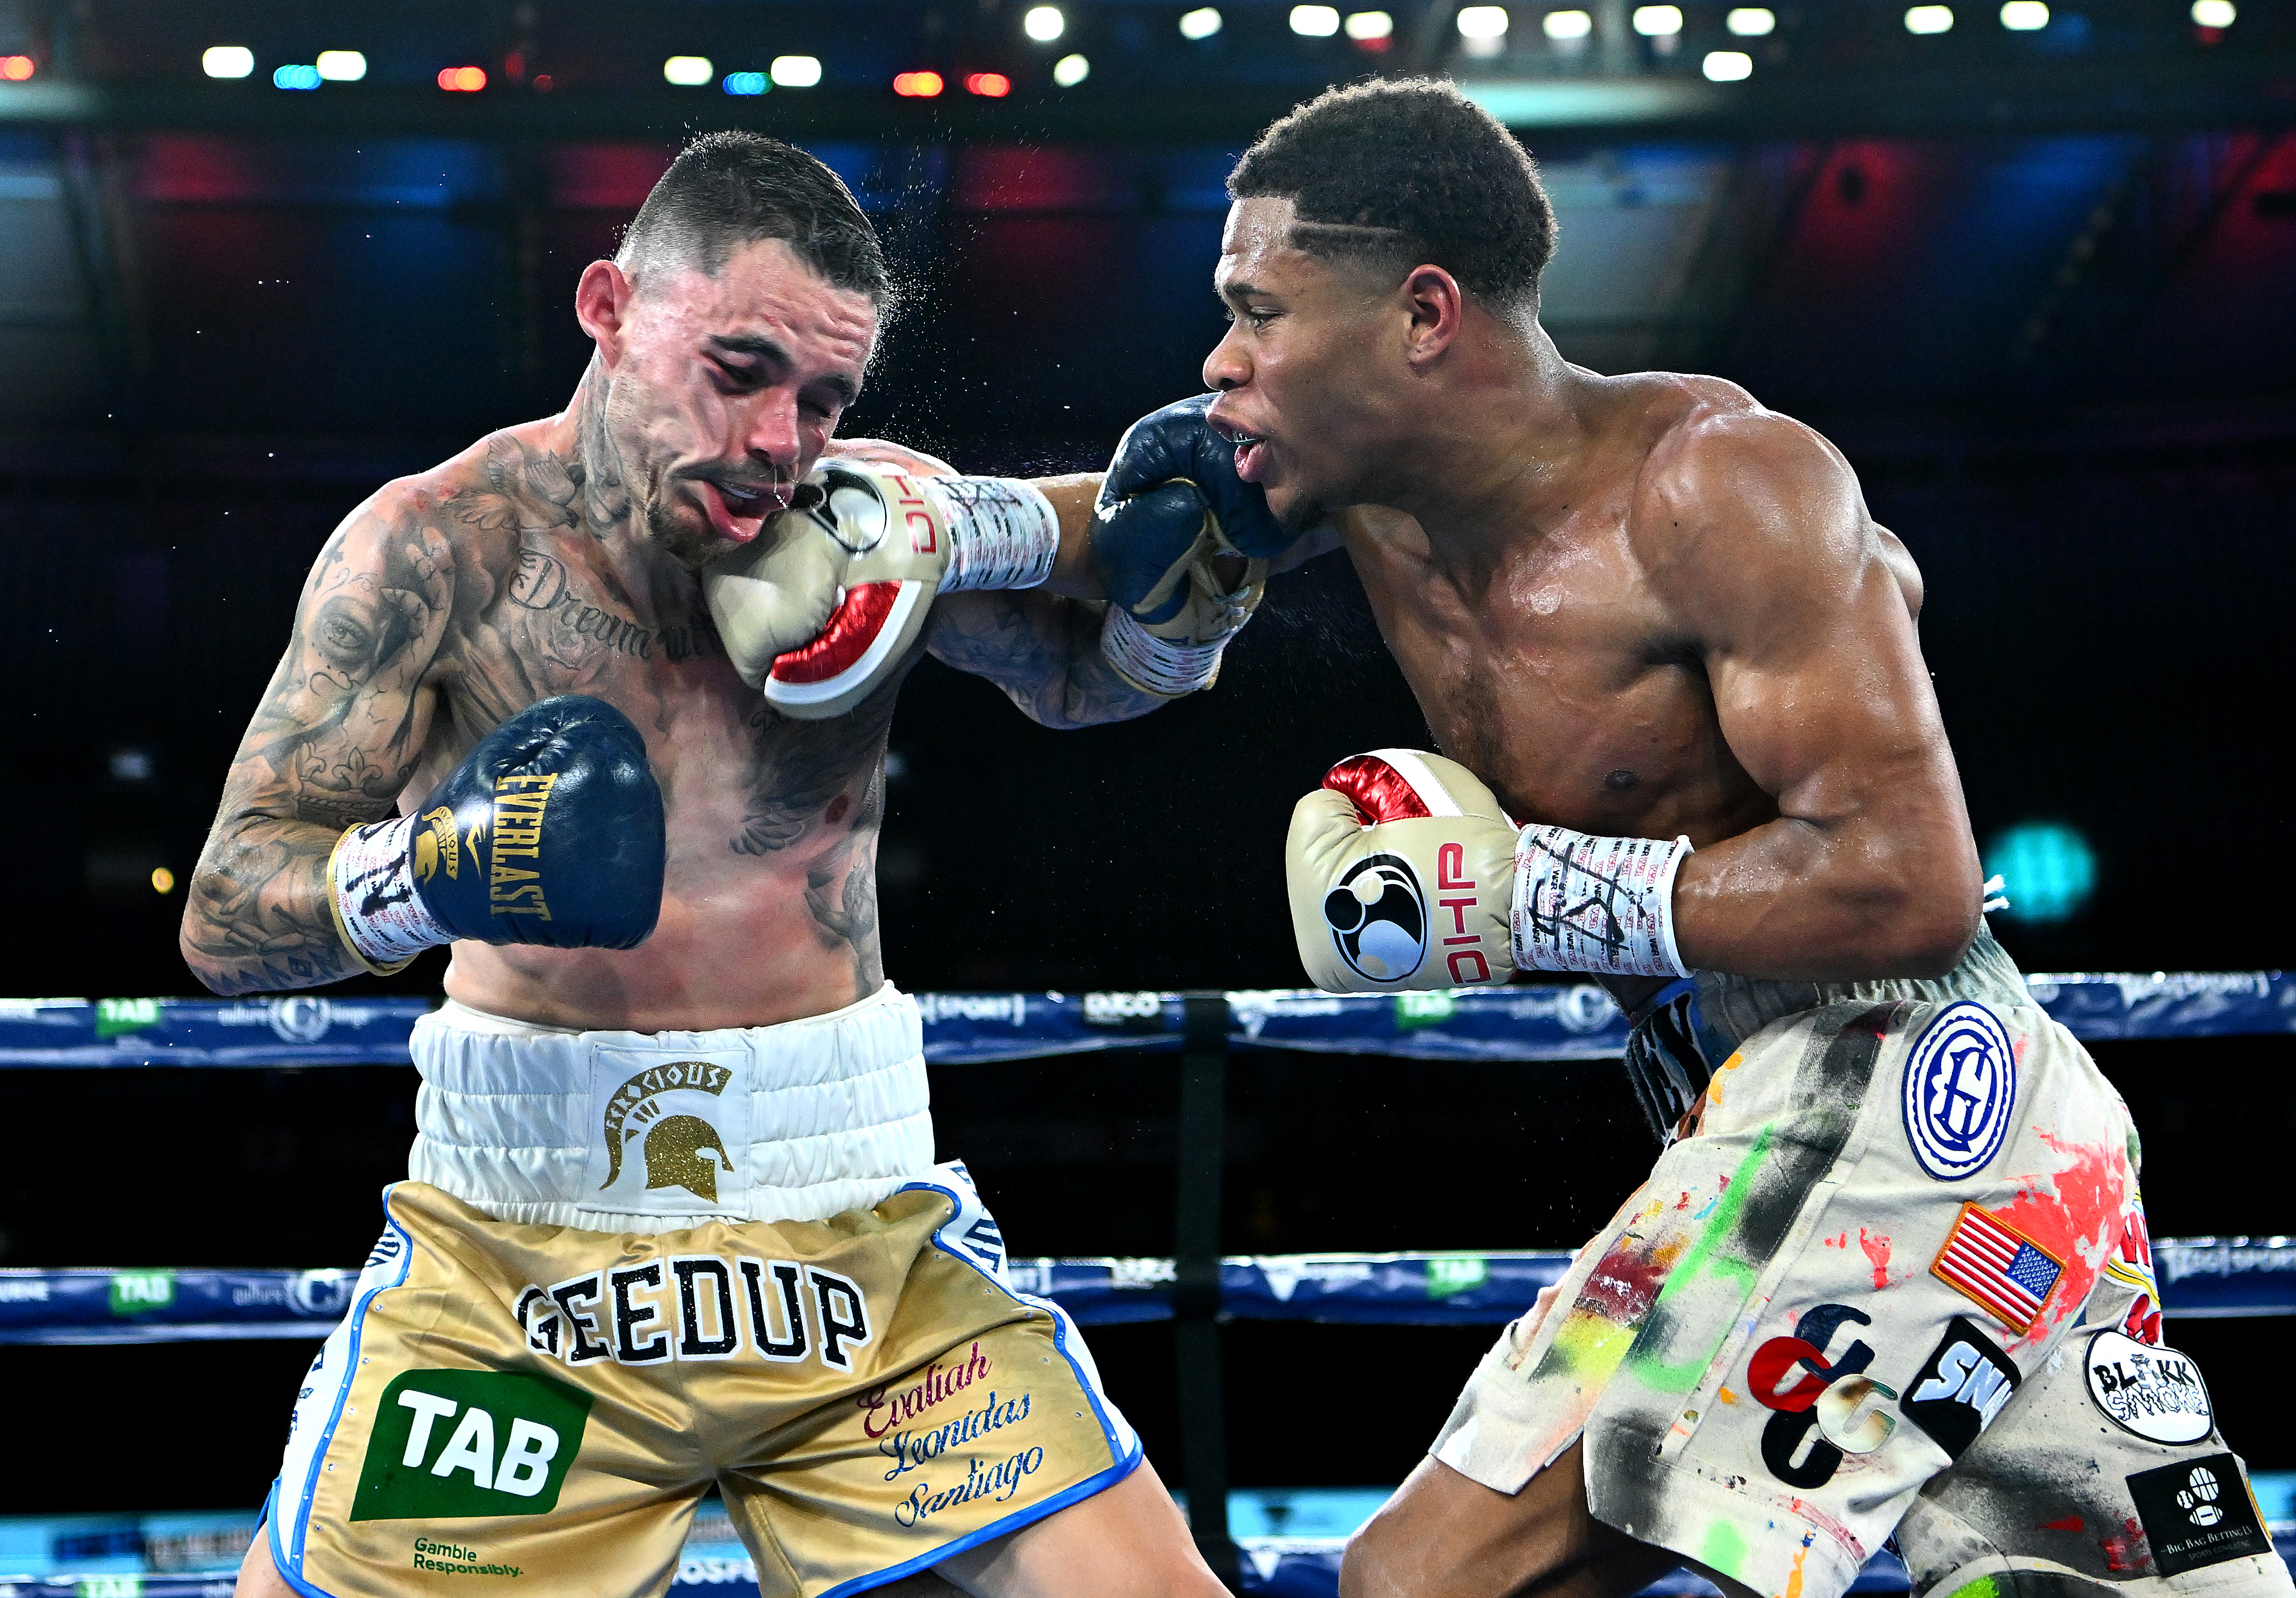 George Kambosos Jr says he has activated his rematch clause to face Devin Haney a second time